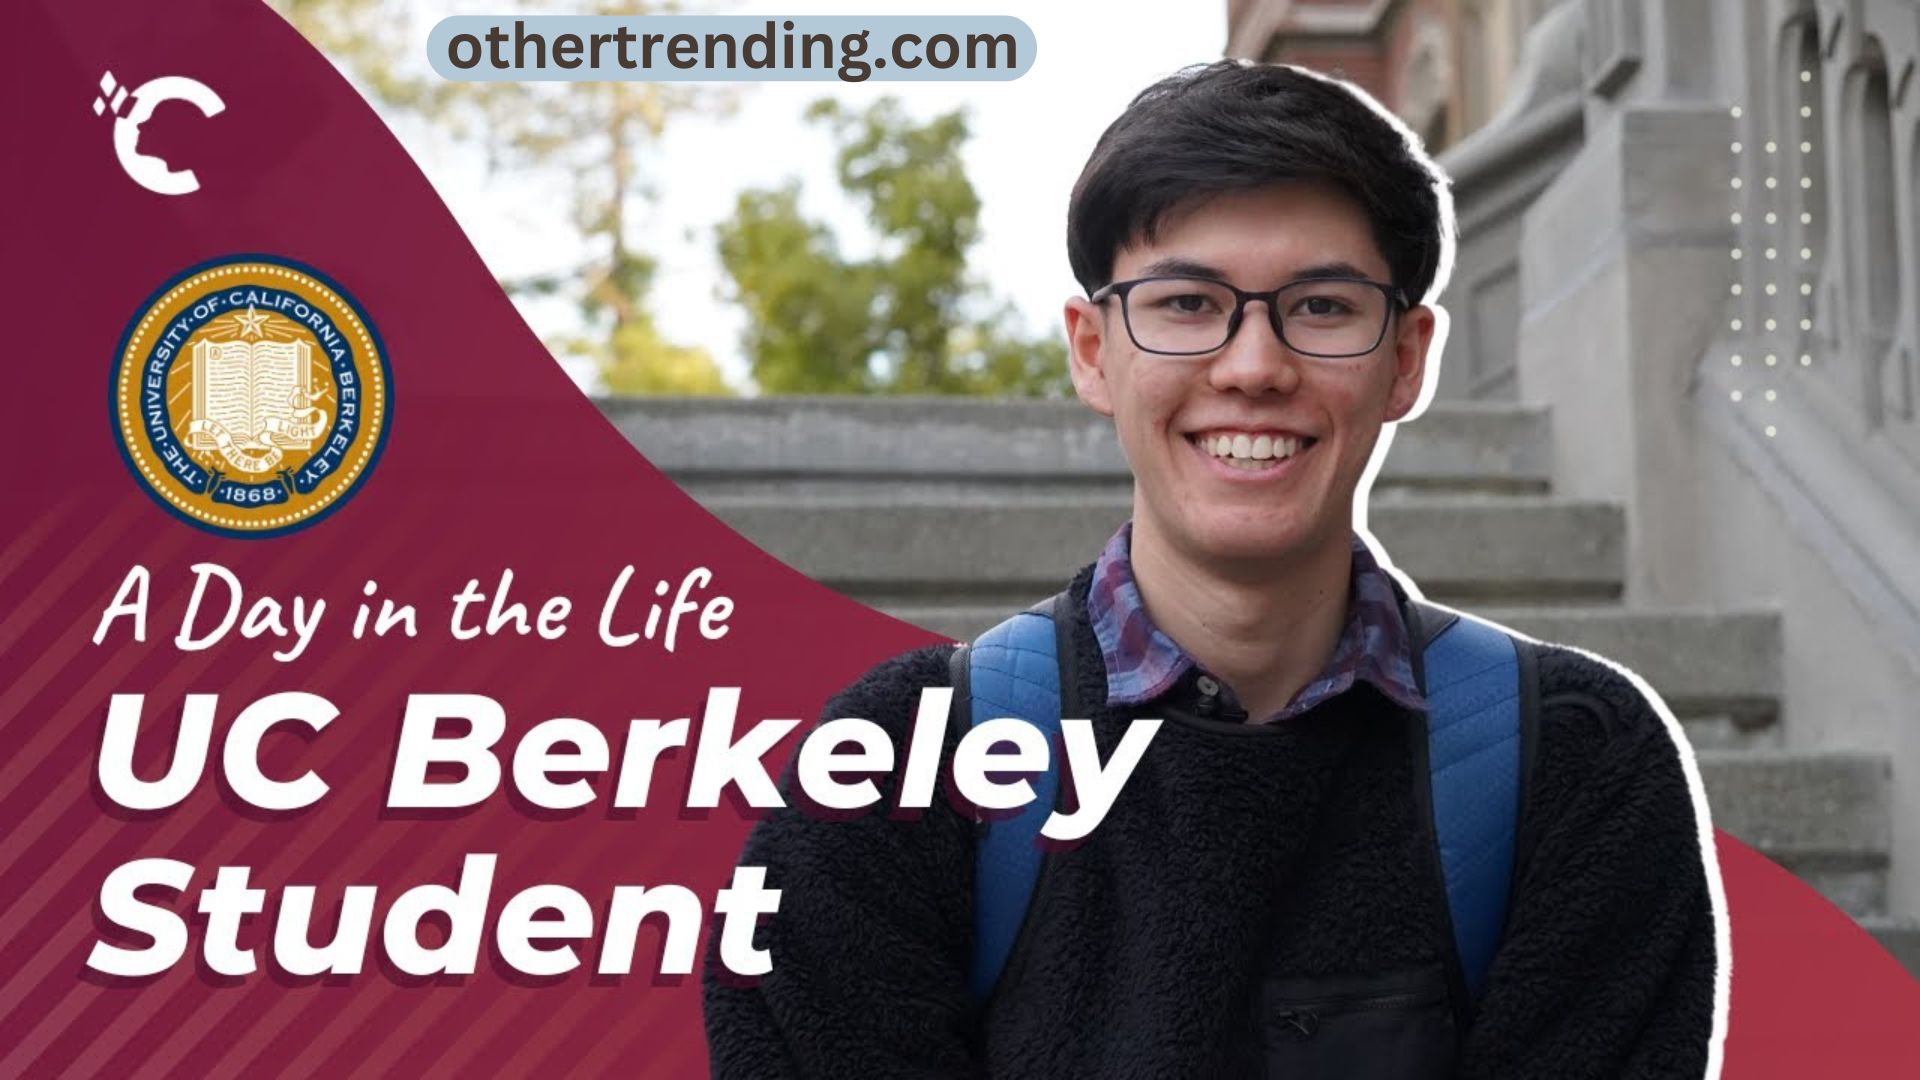 Opening the Energetic Understudy Life at College of California, Berkeley: An Extensive Aide